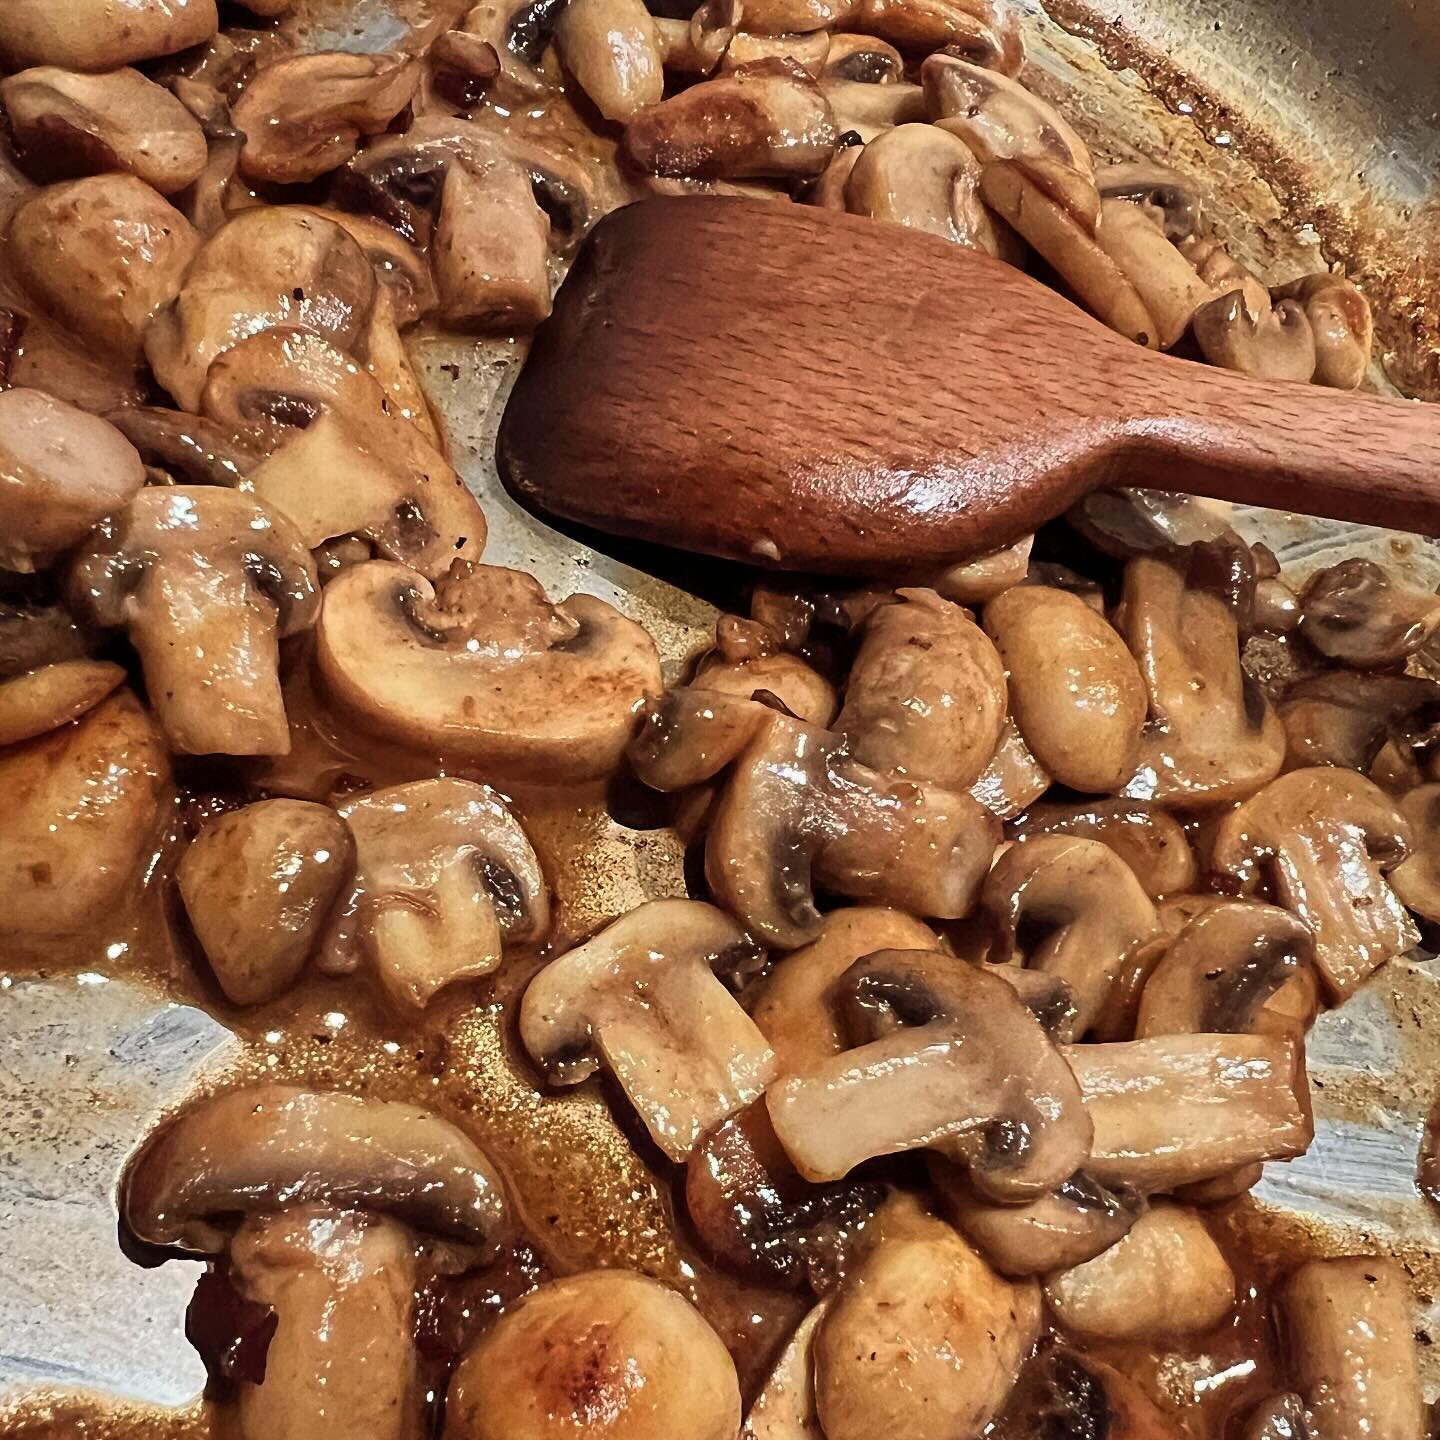 Nothing to say but it&rsquo;s mushroom time, so get mushrooming! #mushrooms #butter #globalpantrycookbook